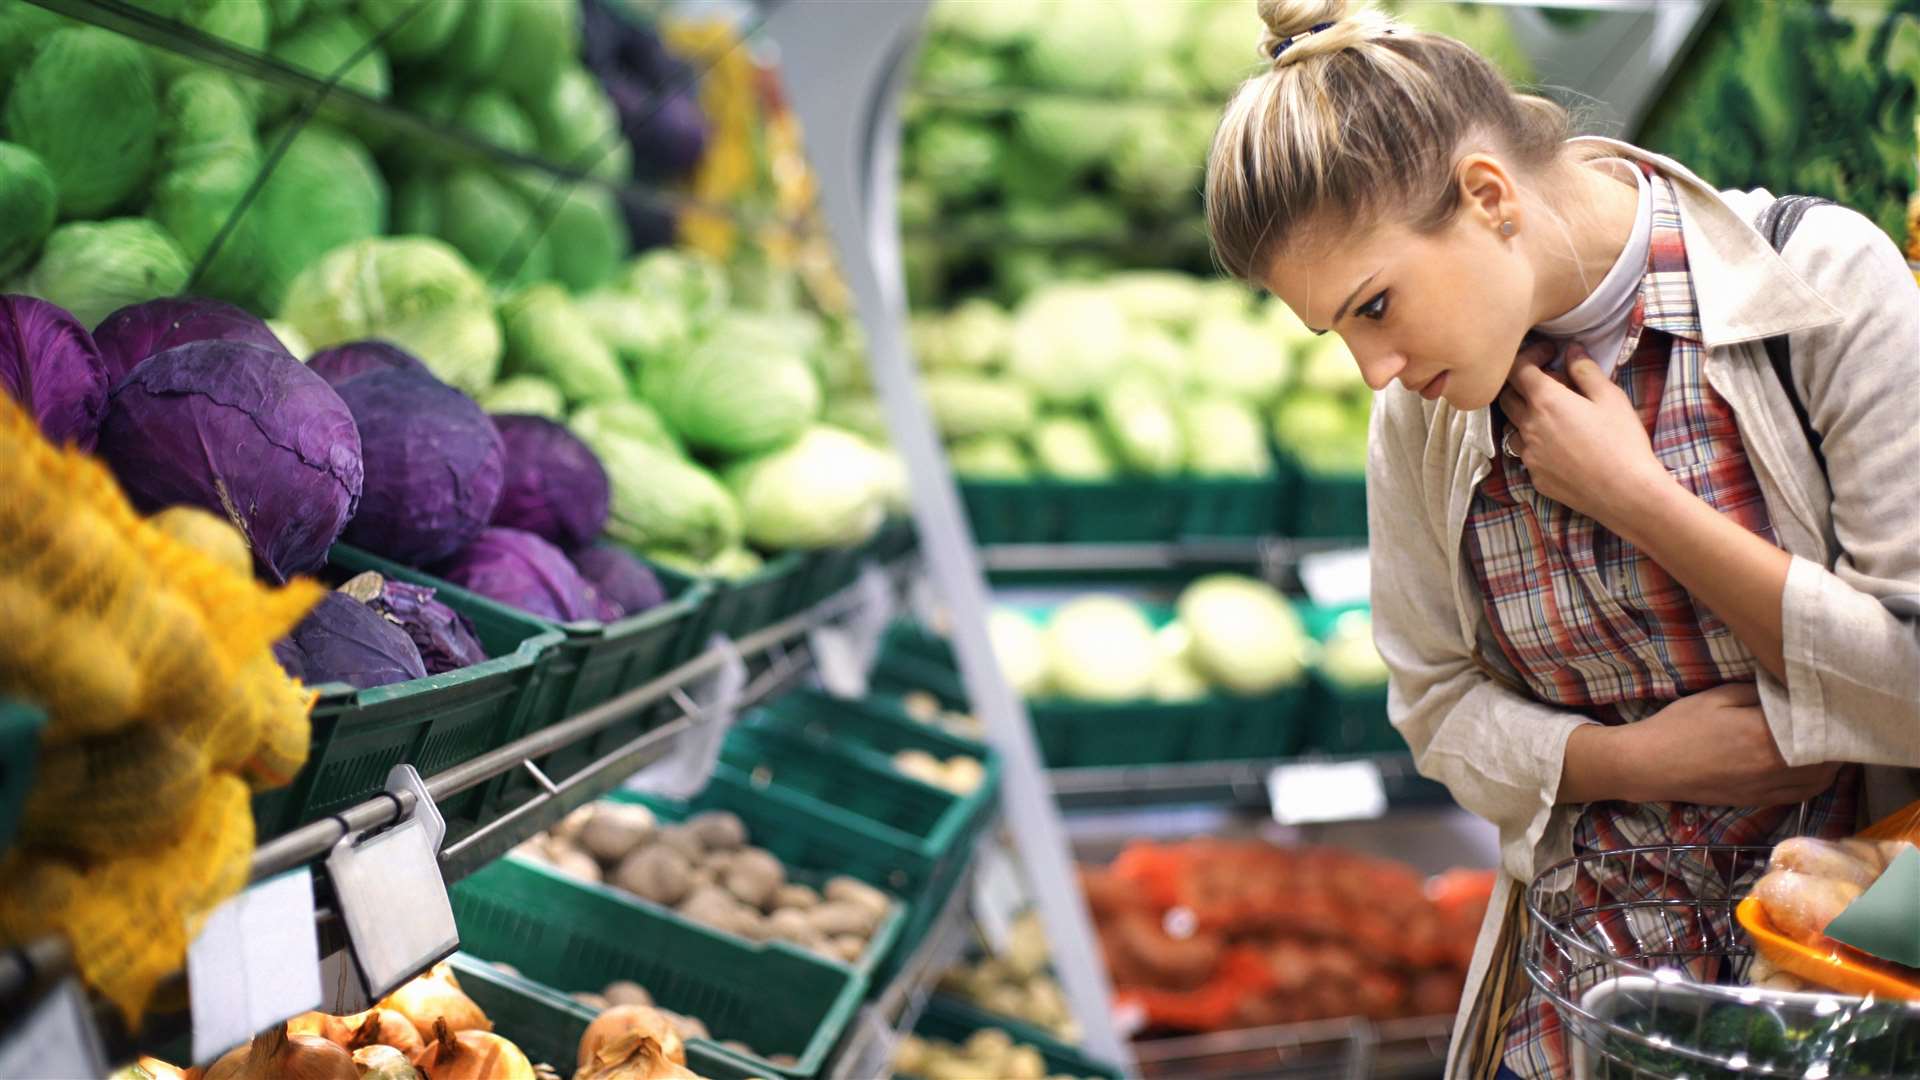 Sales of wonky and imperfect fruit and veg are up as people try to save money says Kantar